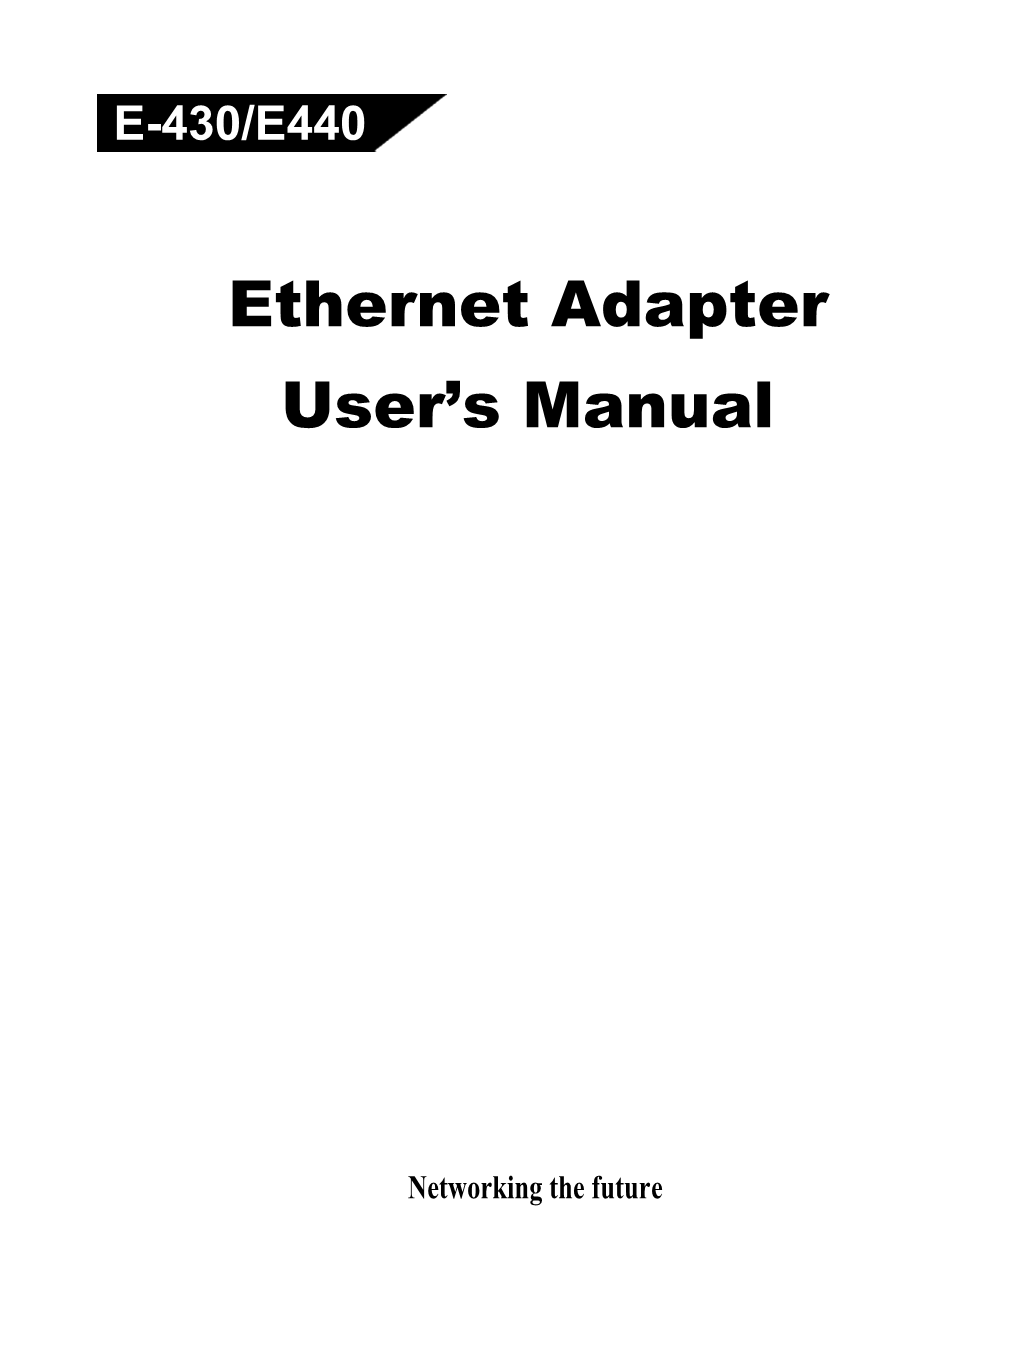 Ethernet Adapter User's Manual